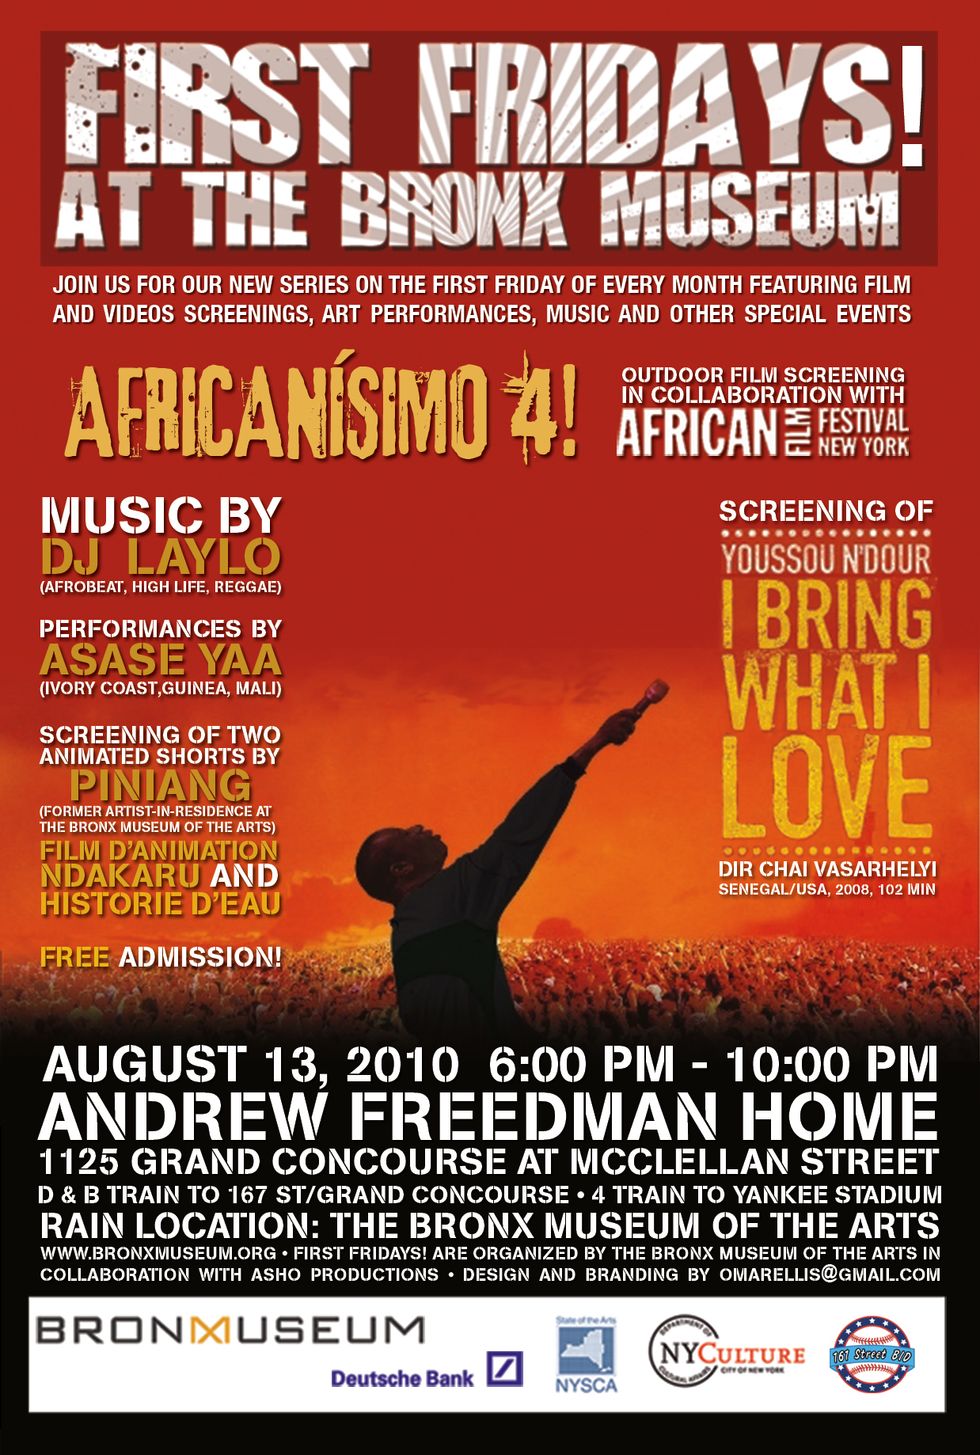 Free today, 8.13 - Africanísimo 4! 4th Annual Outdoor Film Screening in collaboration with African Film Festival